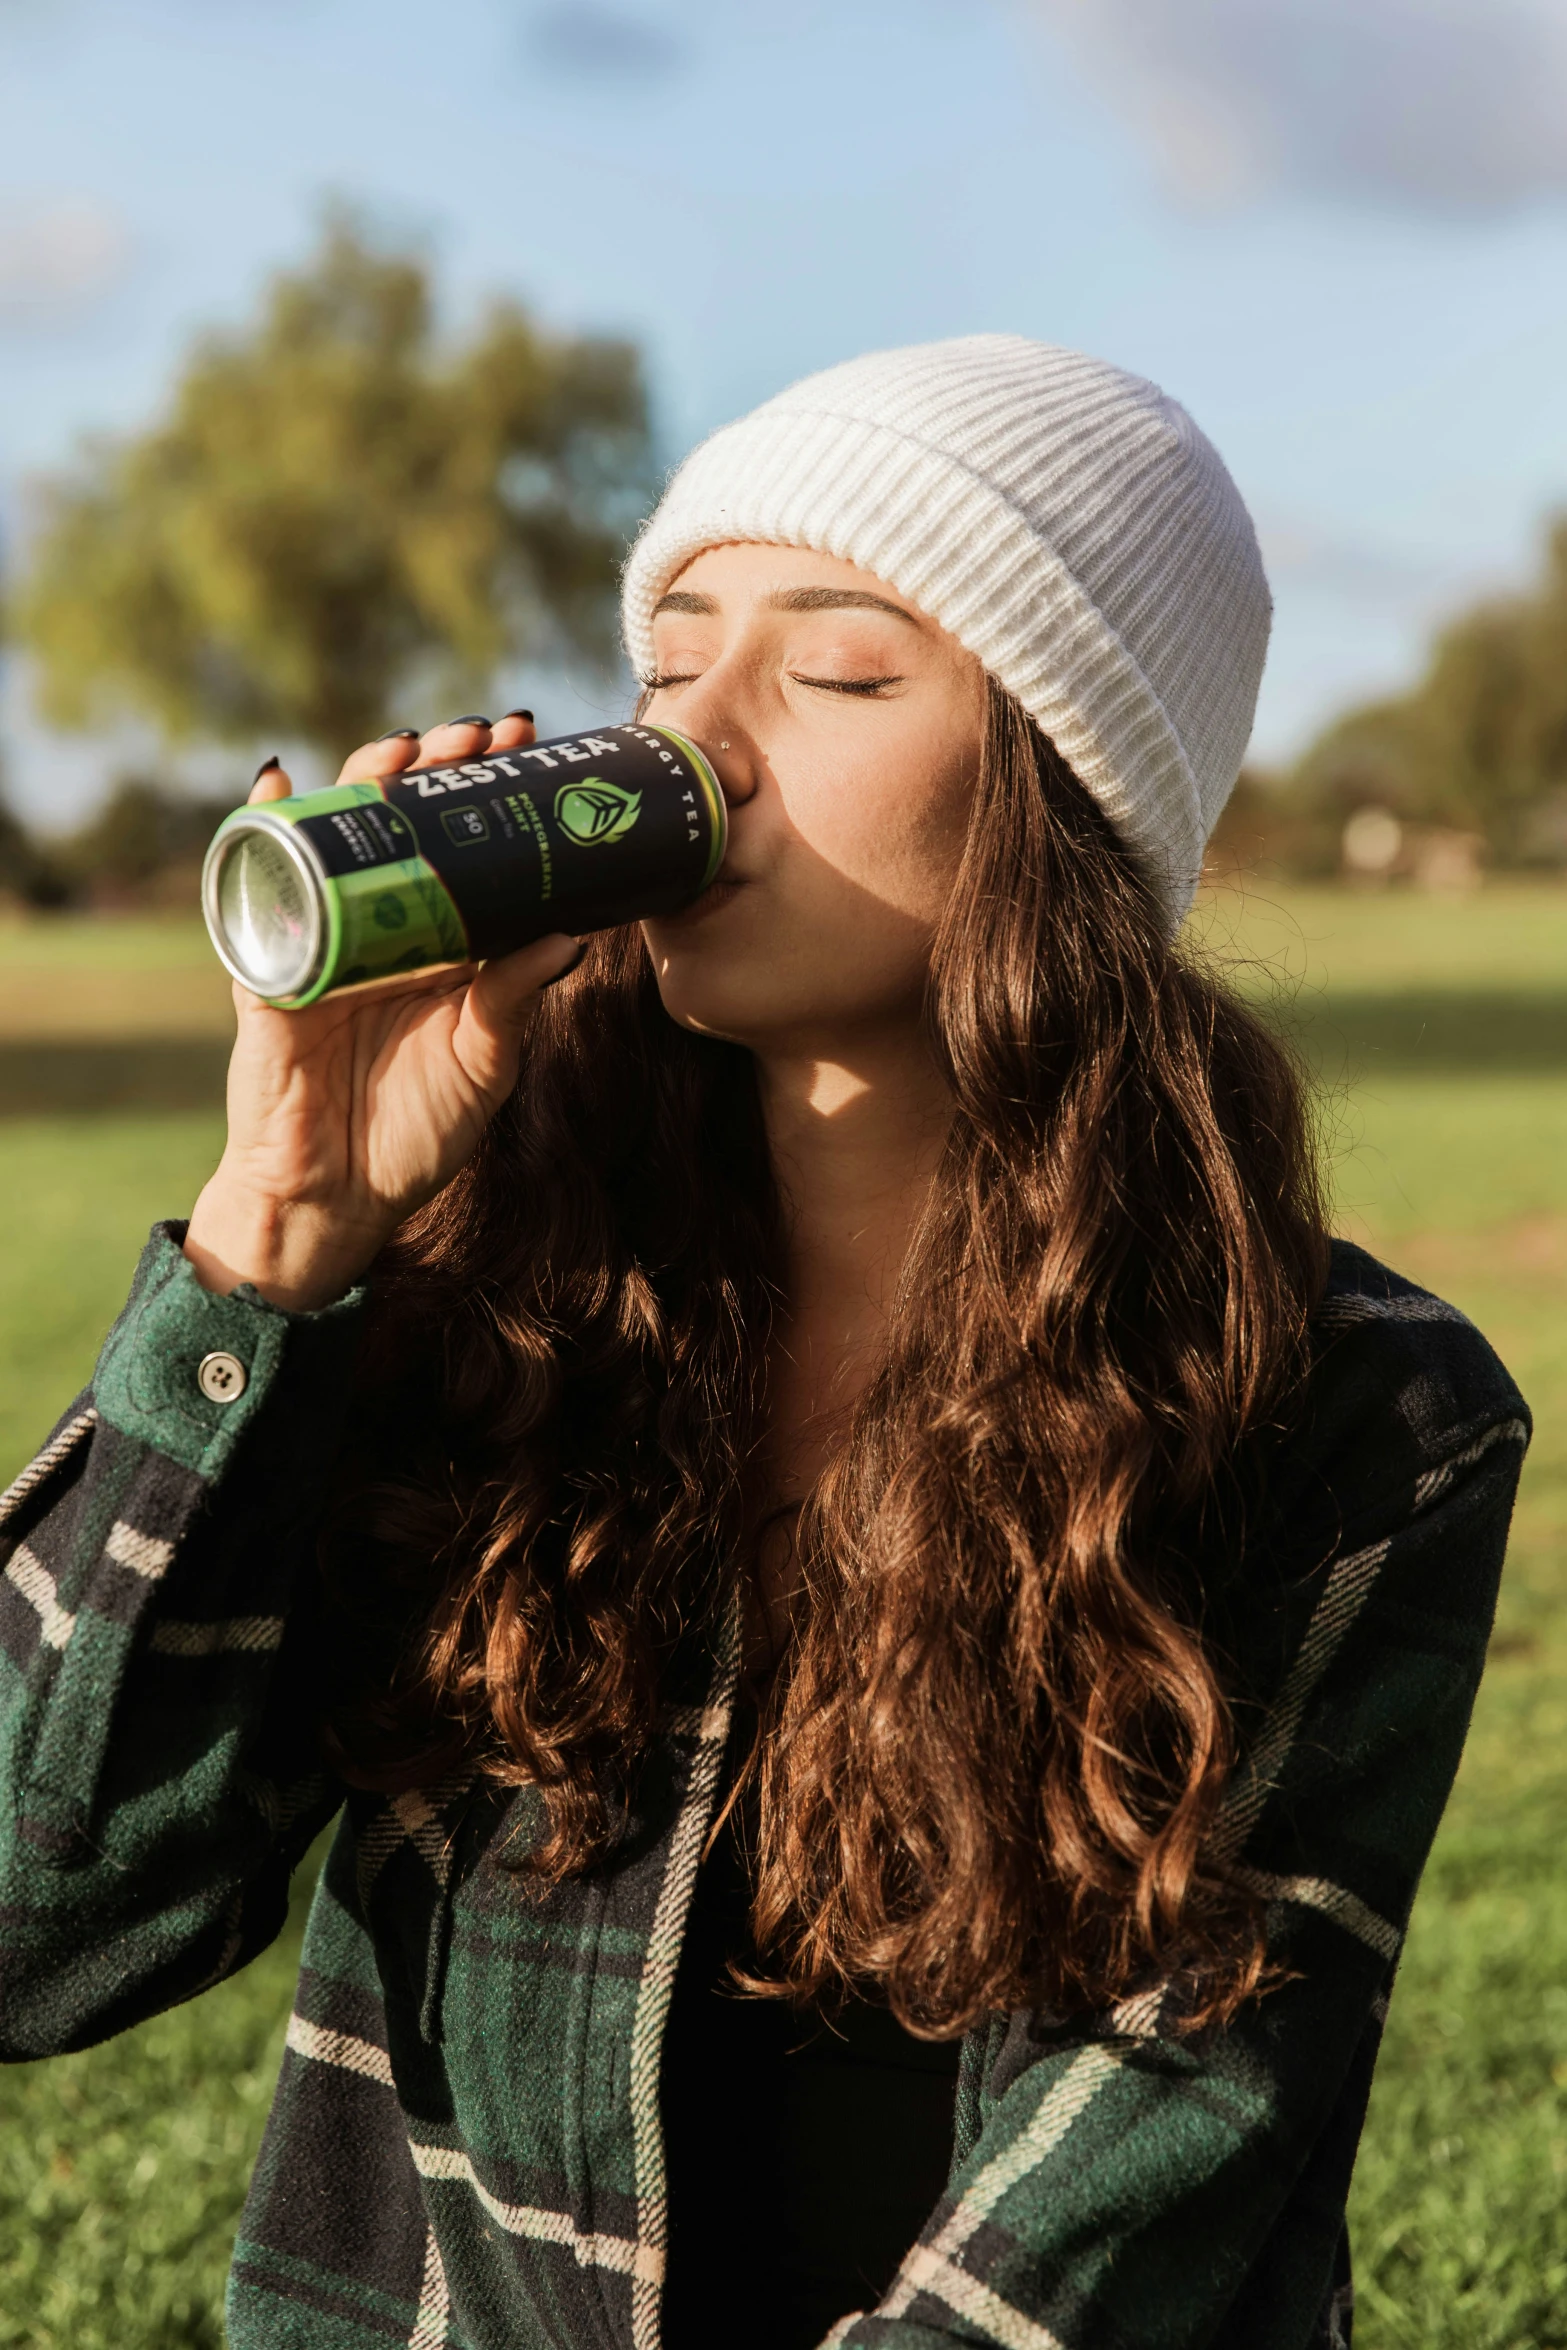 girl drinking coke from a can outdoors in the grass